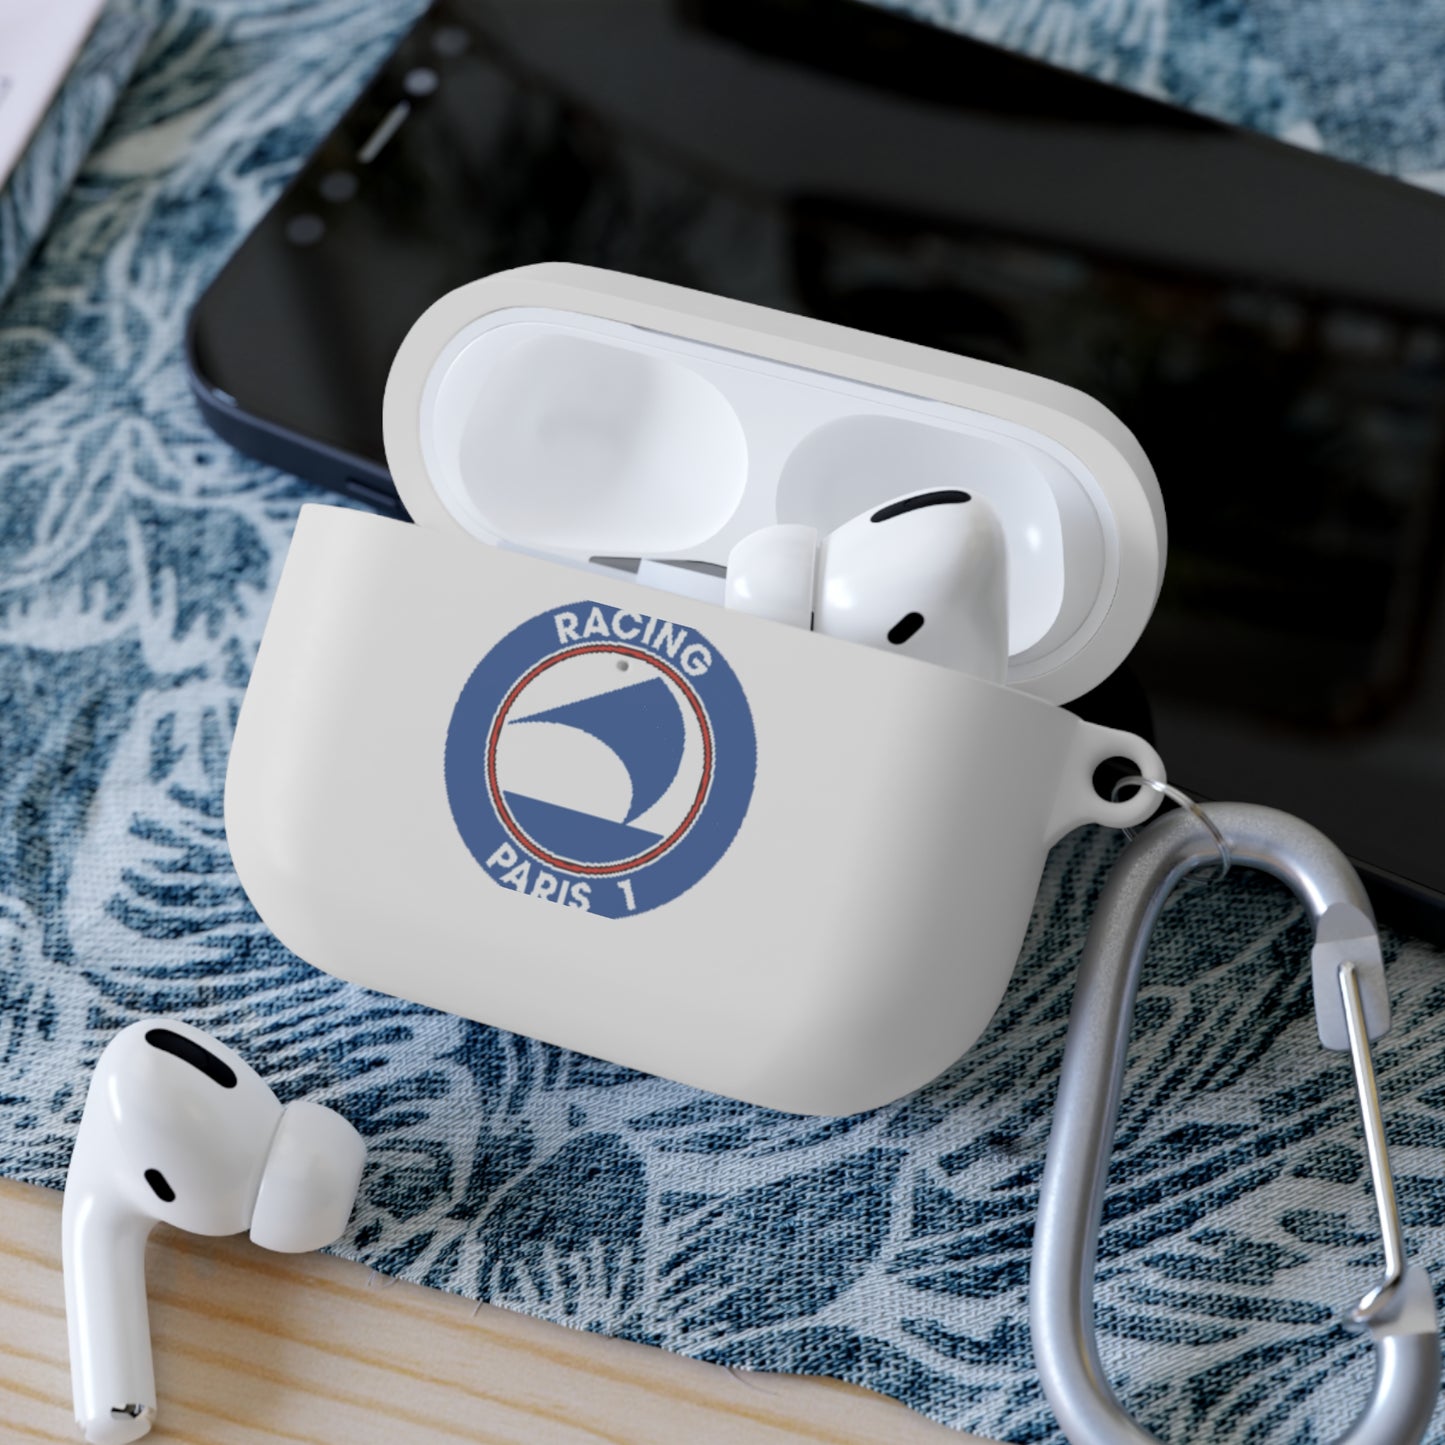 Racing Paris 1 (Rp1) AirPods and AirPods Pro Case Cover